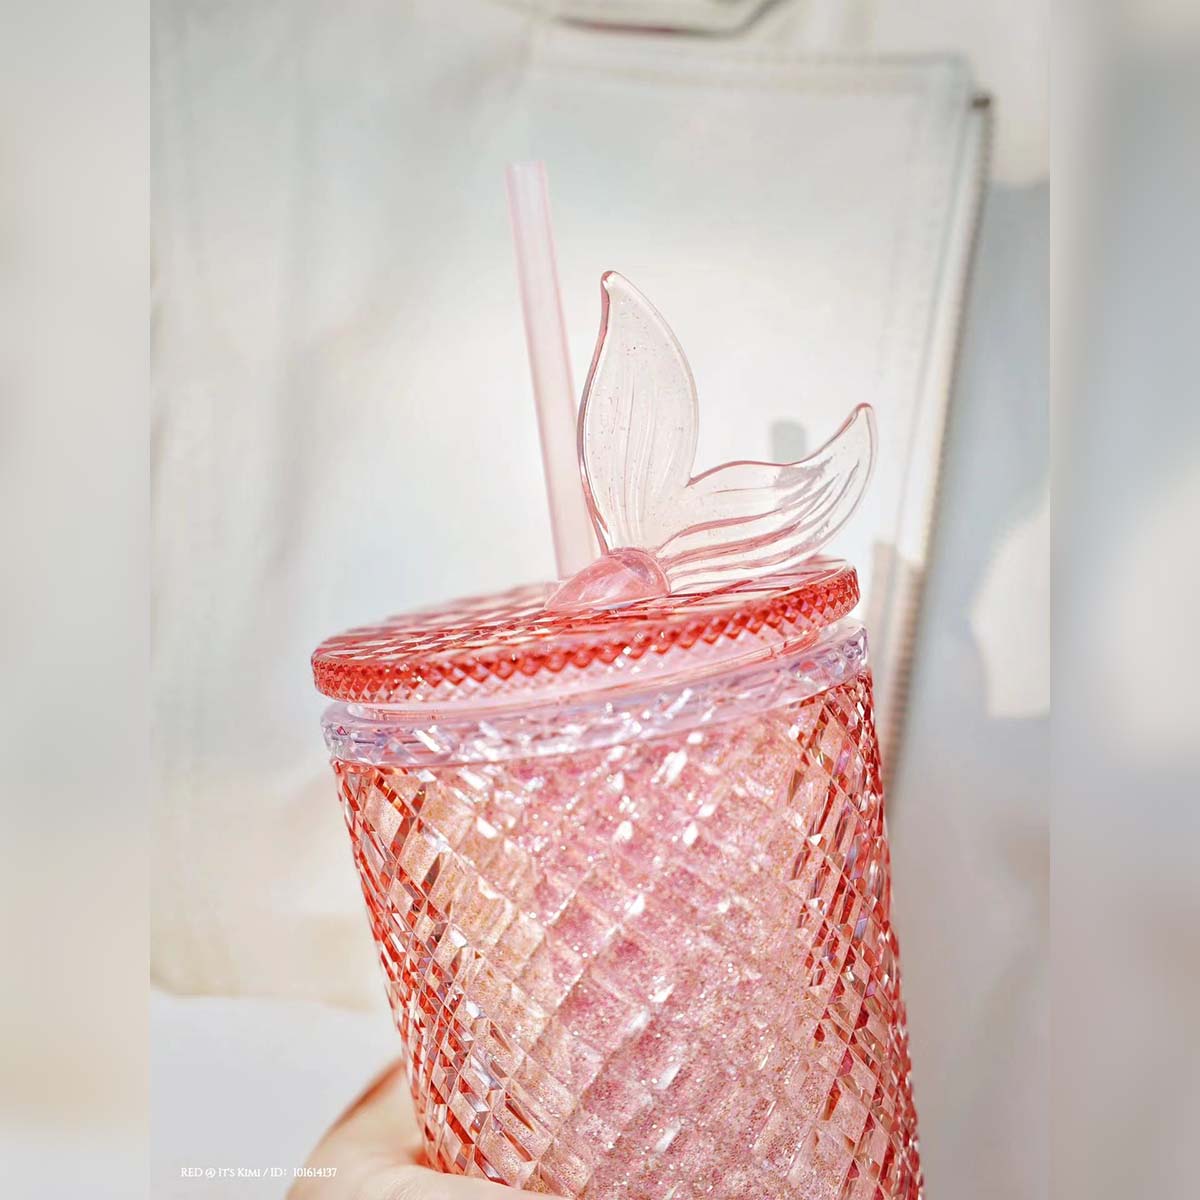 Wholesale Starbucks tumbler- pink hearts tumbler- valentine tumbler- pink  Starbucks cup- valentines day Starbucks tumbler- pink faux glitter tumbler  for your store - Faire